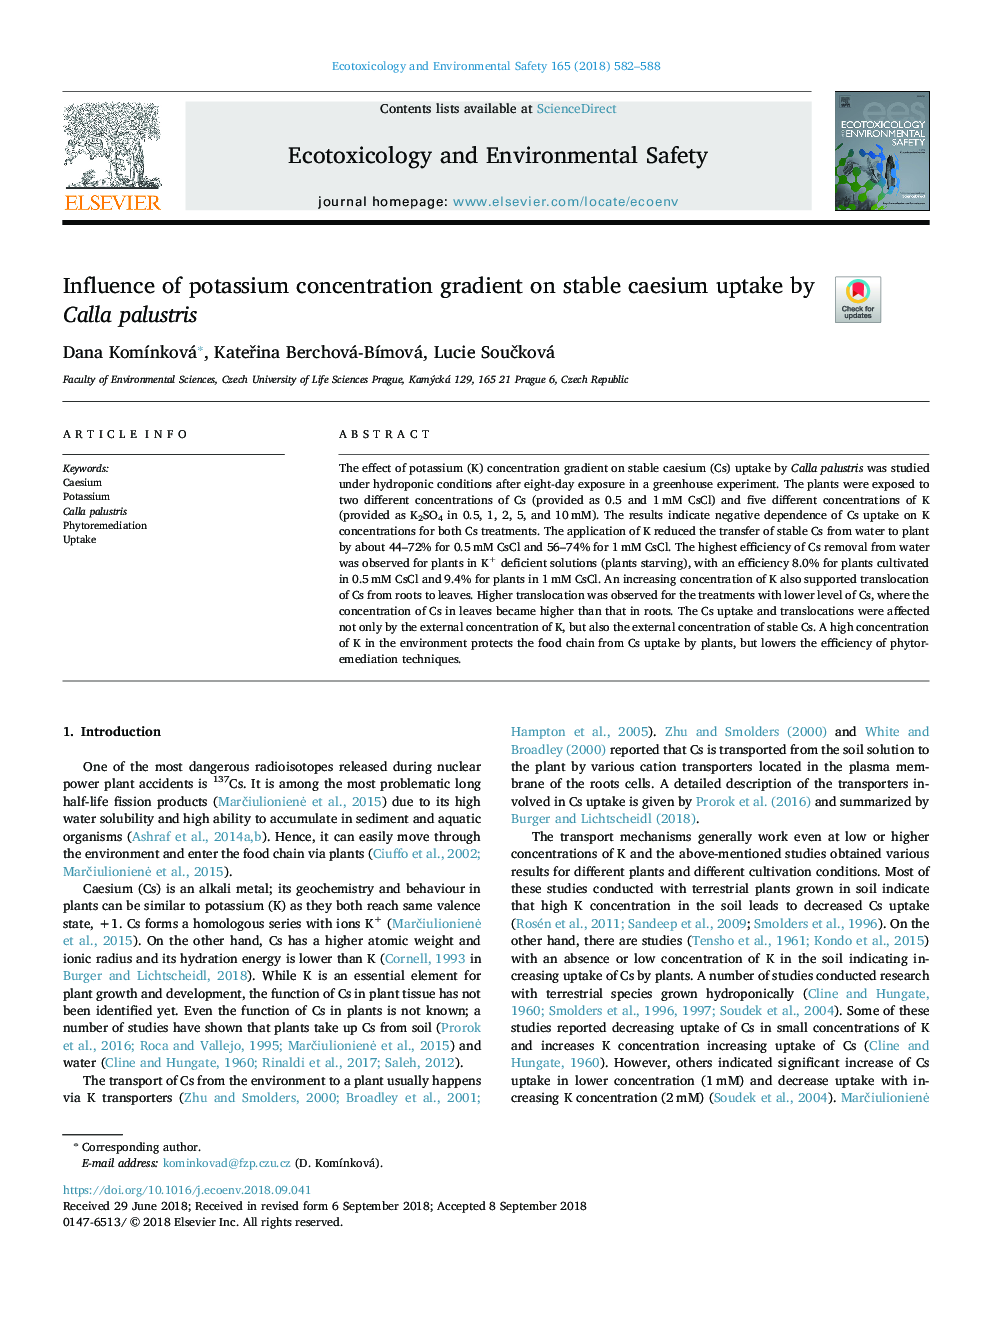 Influence of potassium concentration gradient on stable caesium uptake by Calla palustris